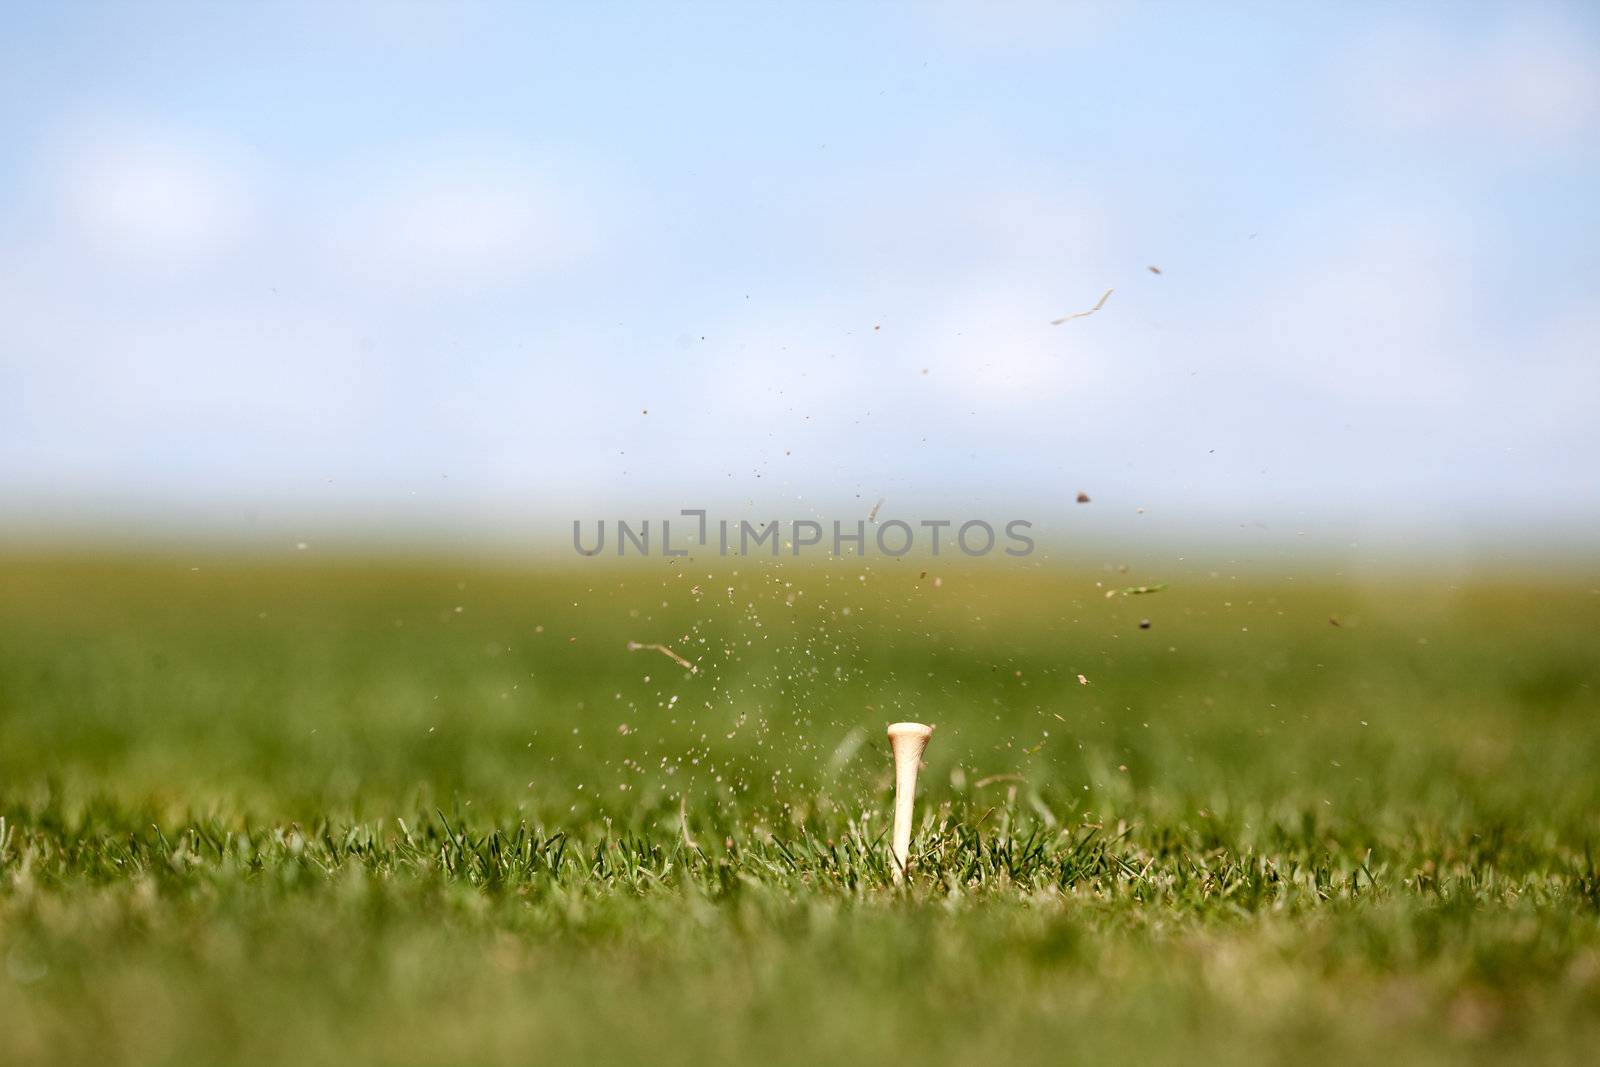 The after effects of a golf swing.  Shallow depth of field with focus on the tee